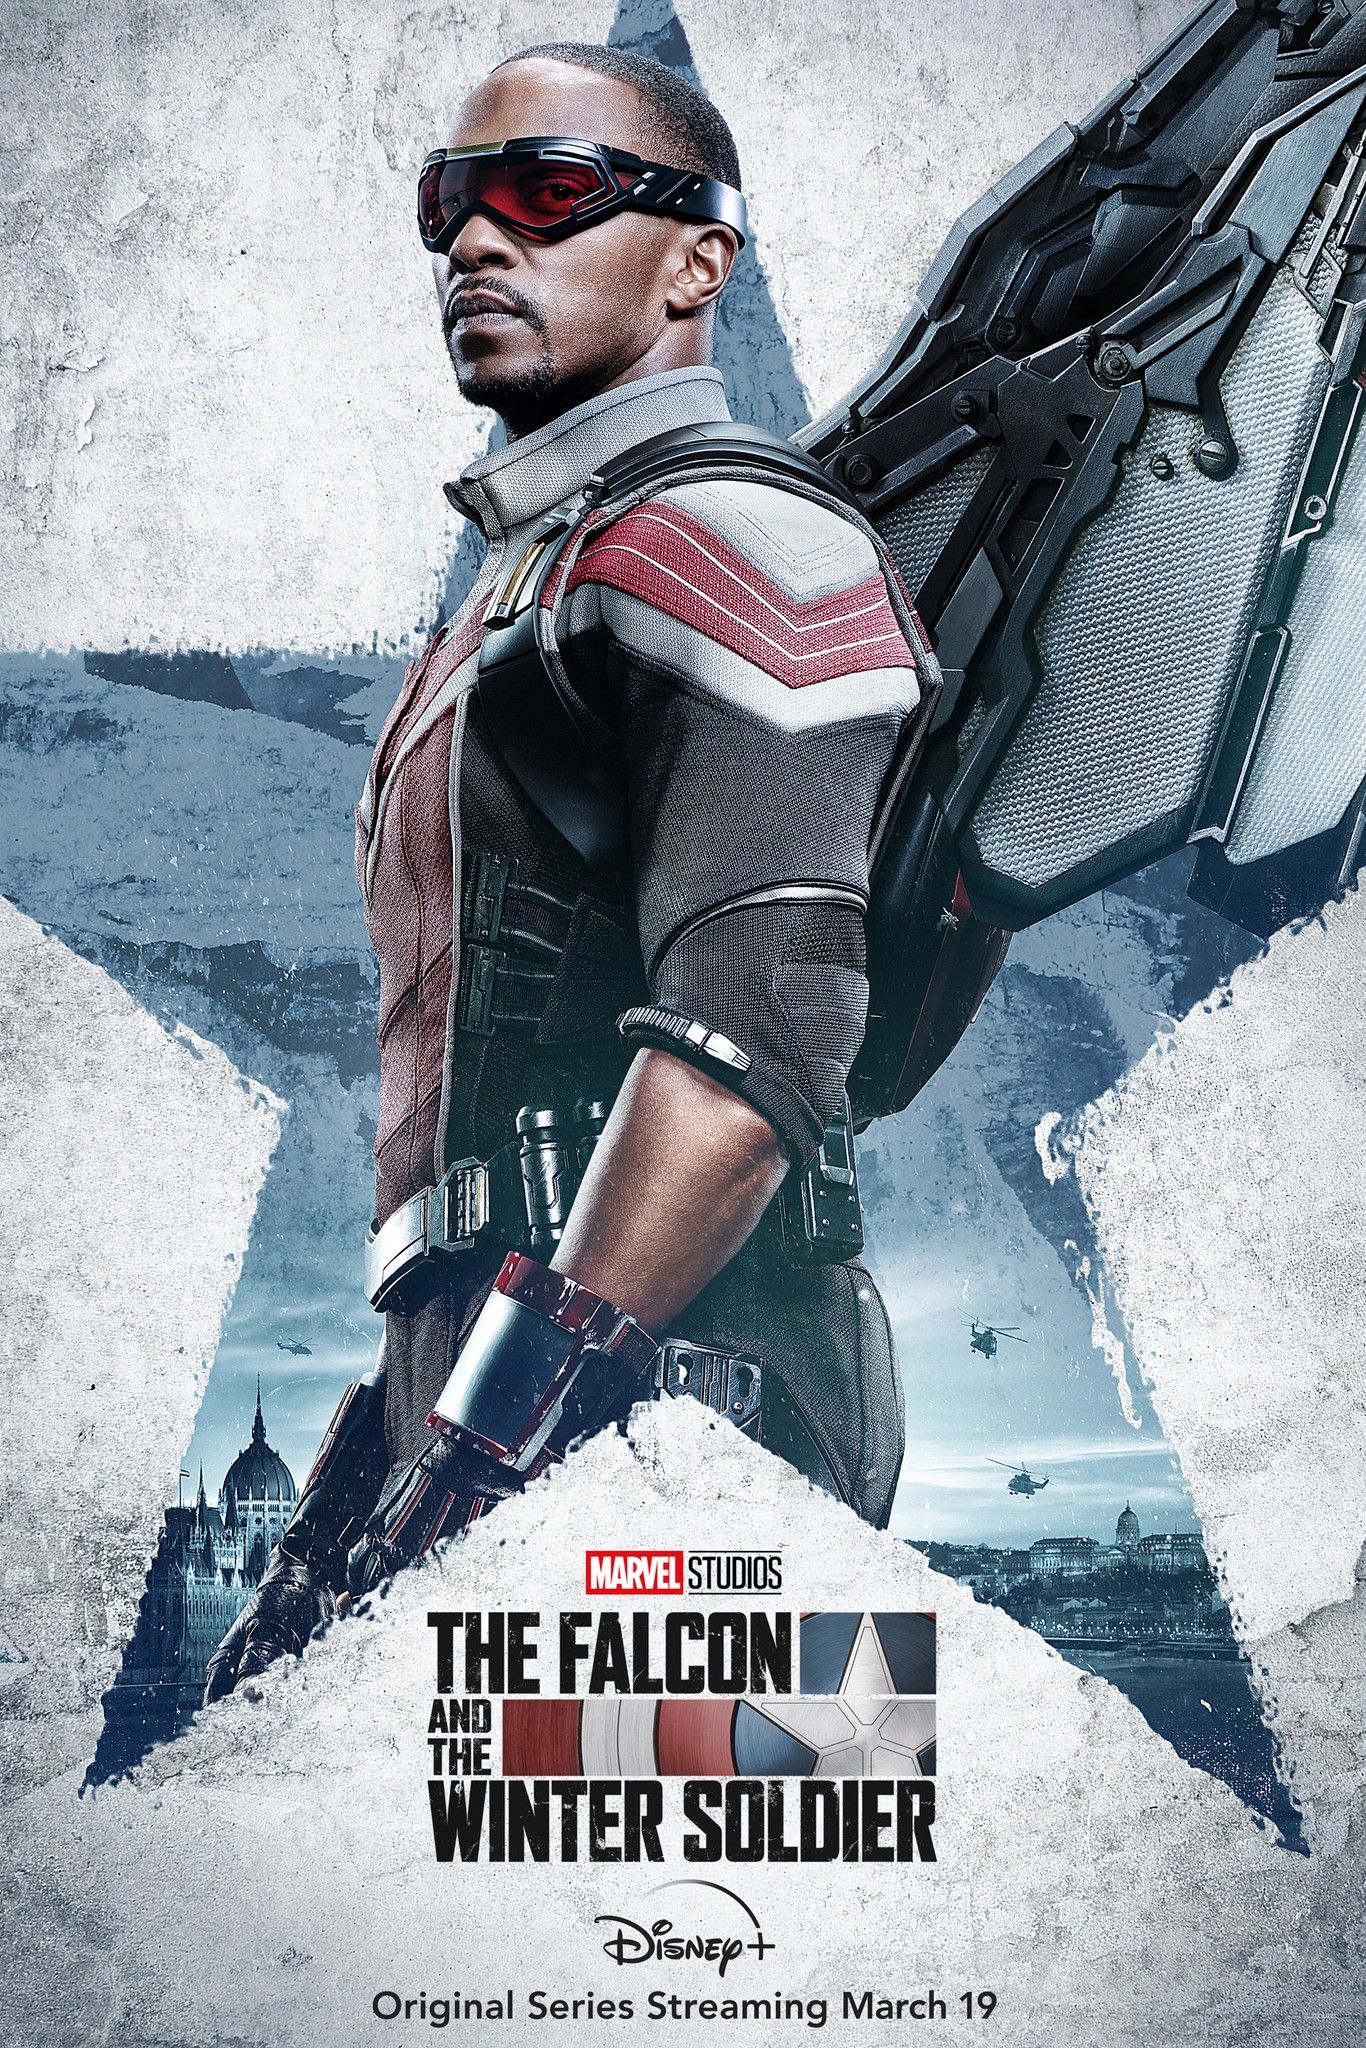 Falcon & Winter Soldier Posters Spotlight Returning MCU Heroes & Villains